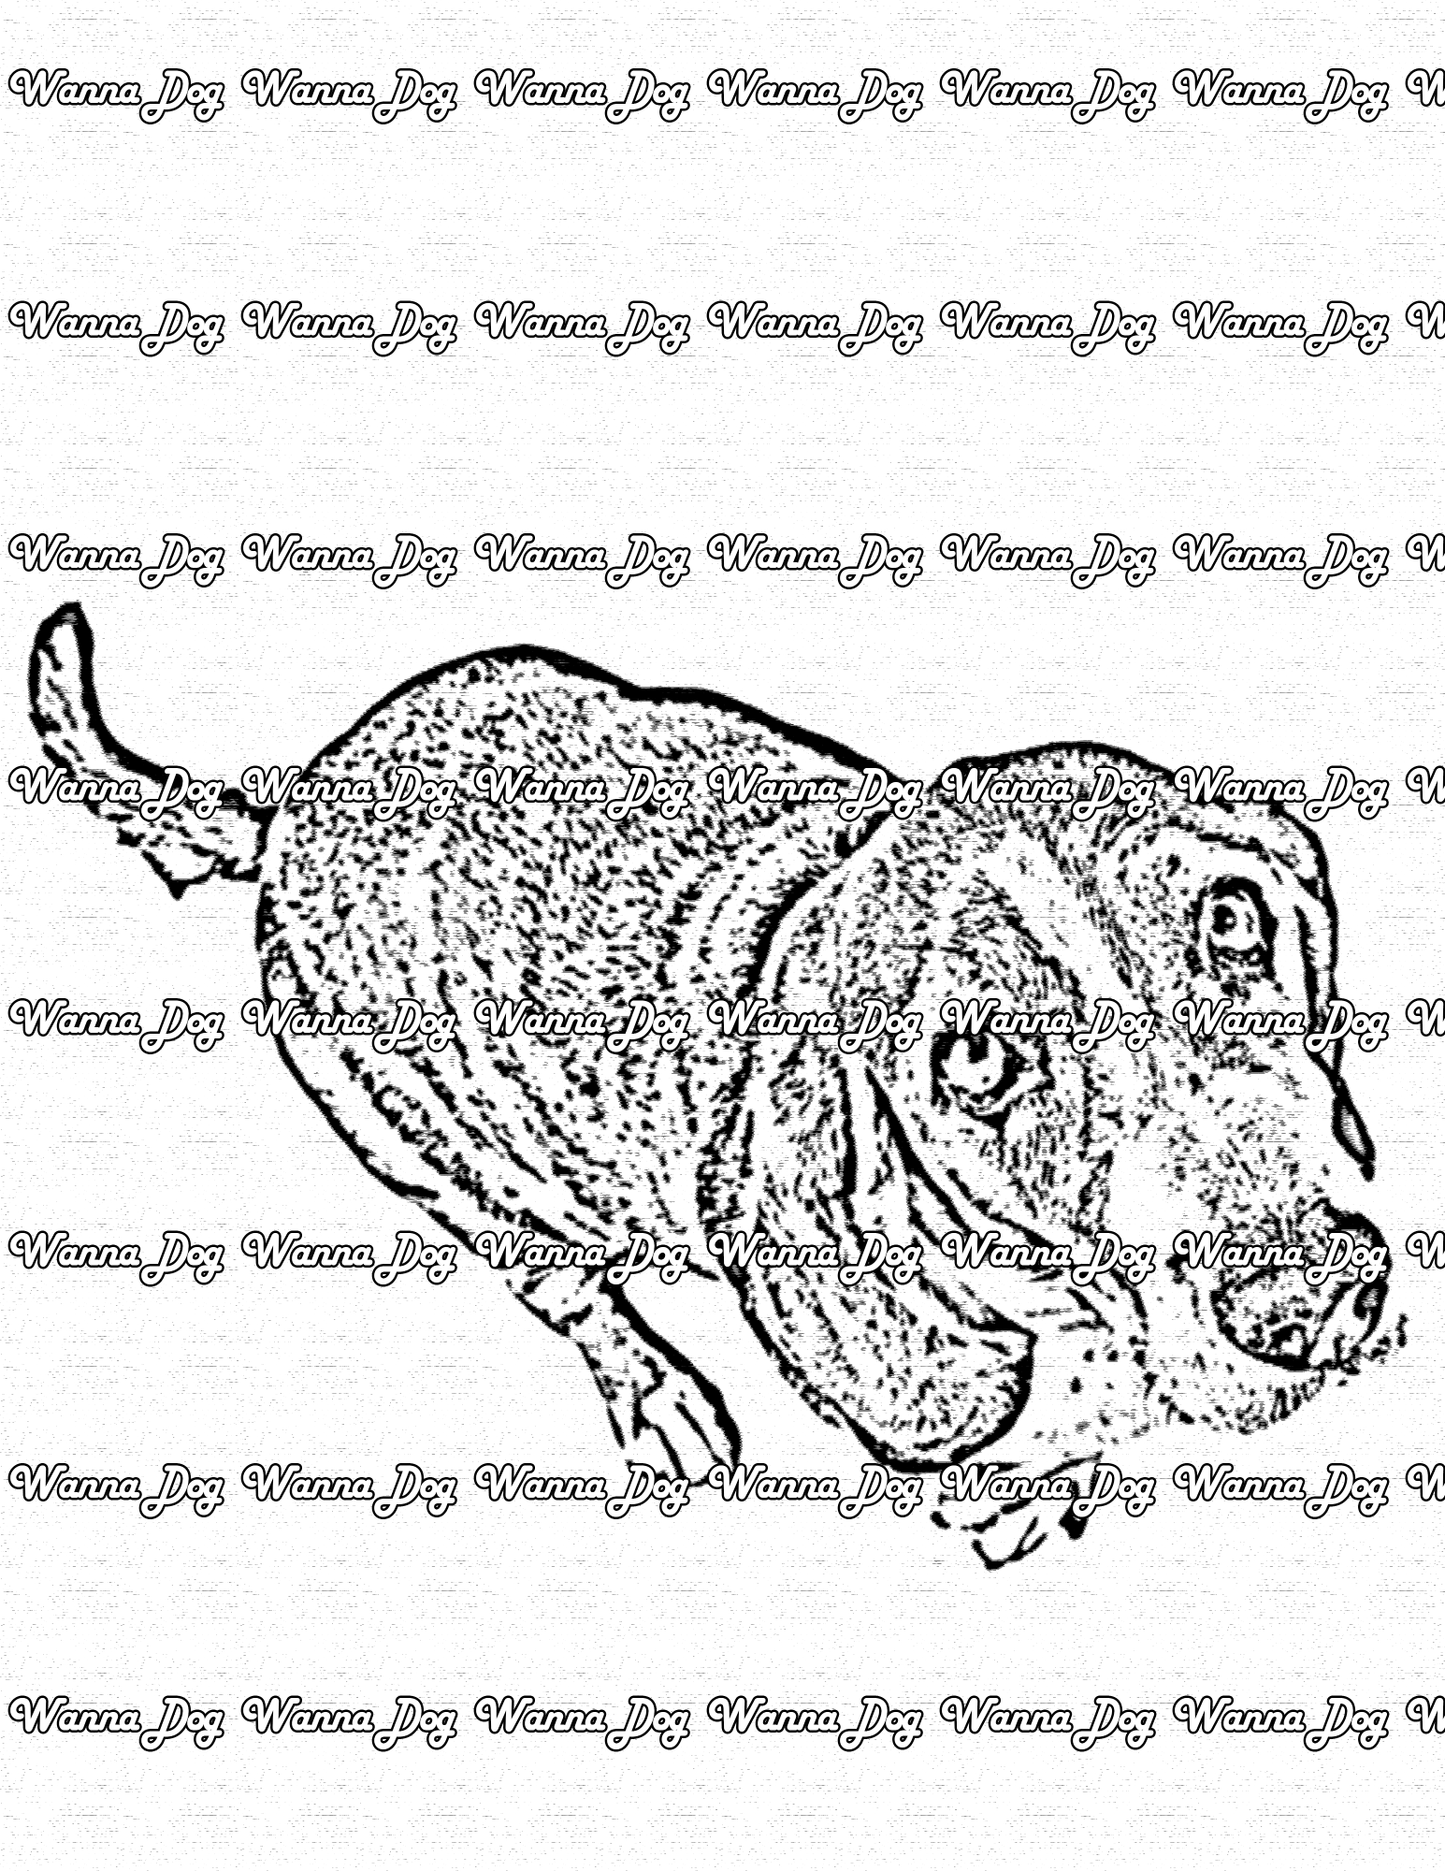 Basset Hound Coloring Page of a Basset Hound looking up at the camera